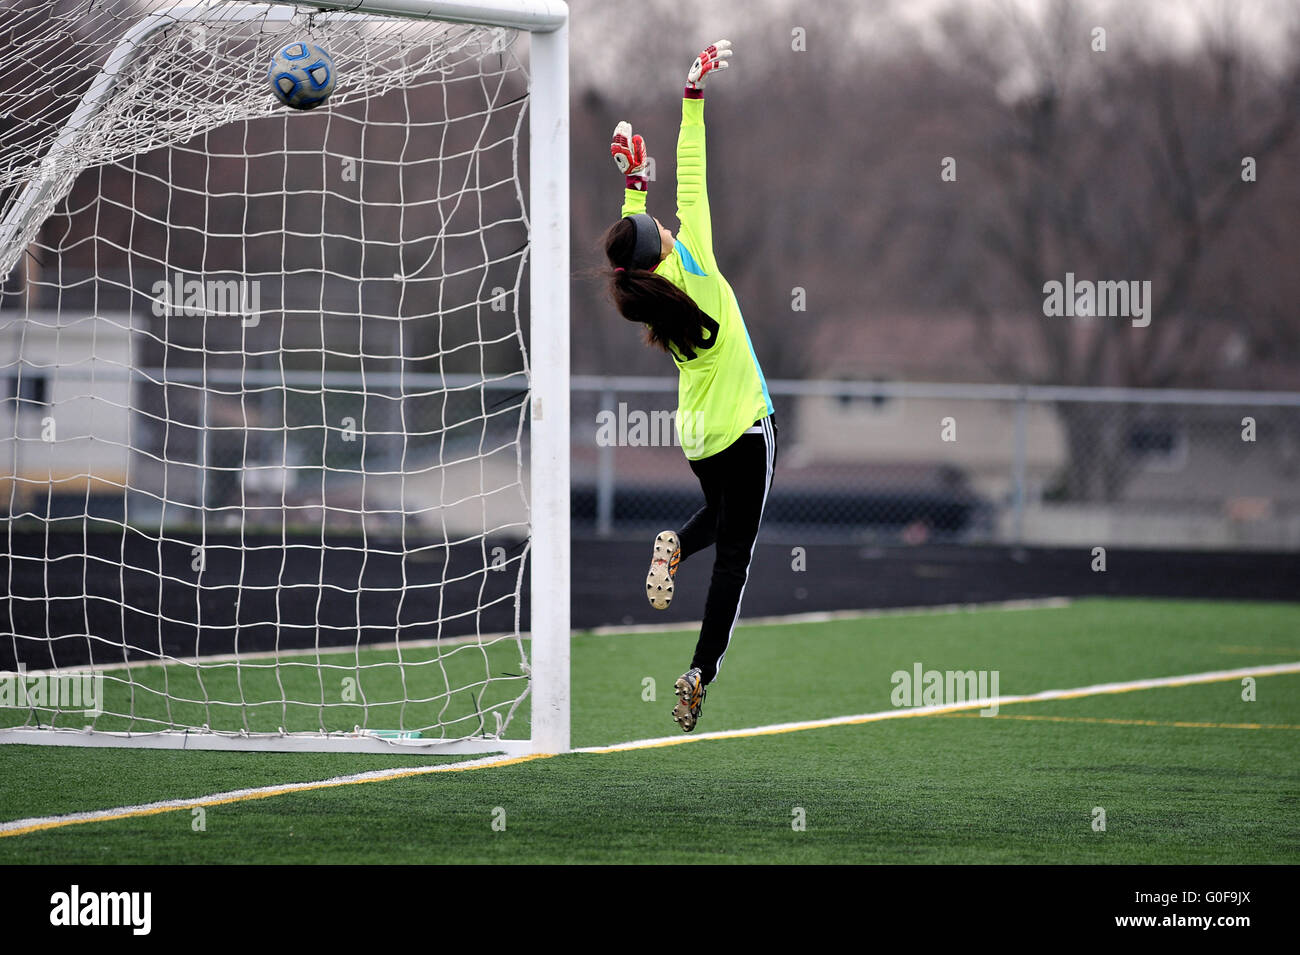 Goal keeper is unable to stop a well placed ball that eluded her leaping effort during a high school soccer match. USA. Stock Photo